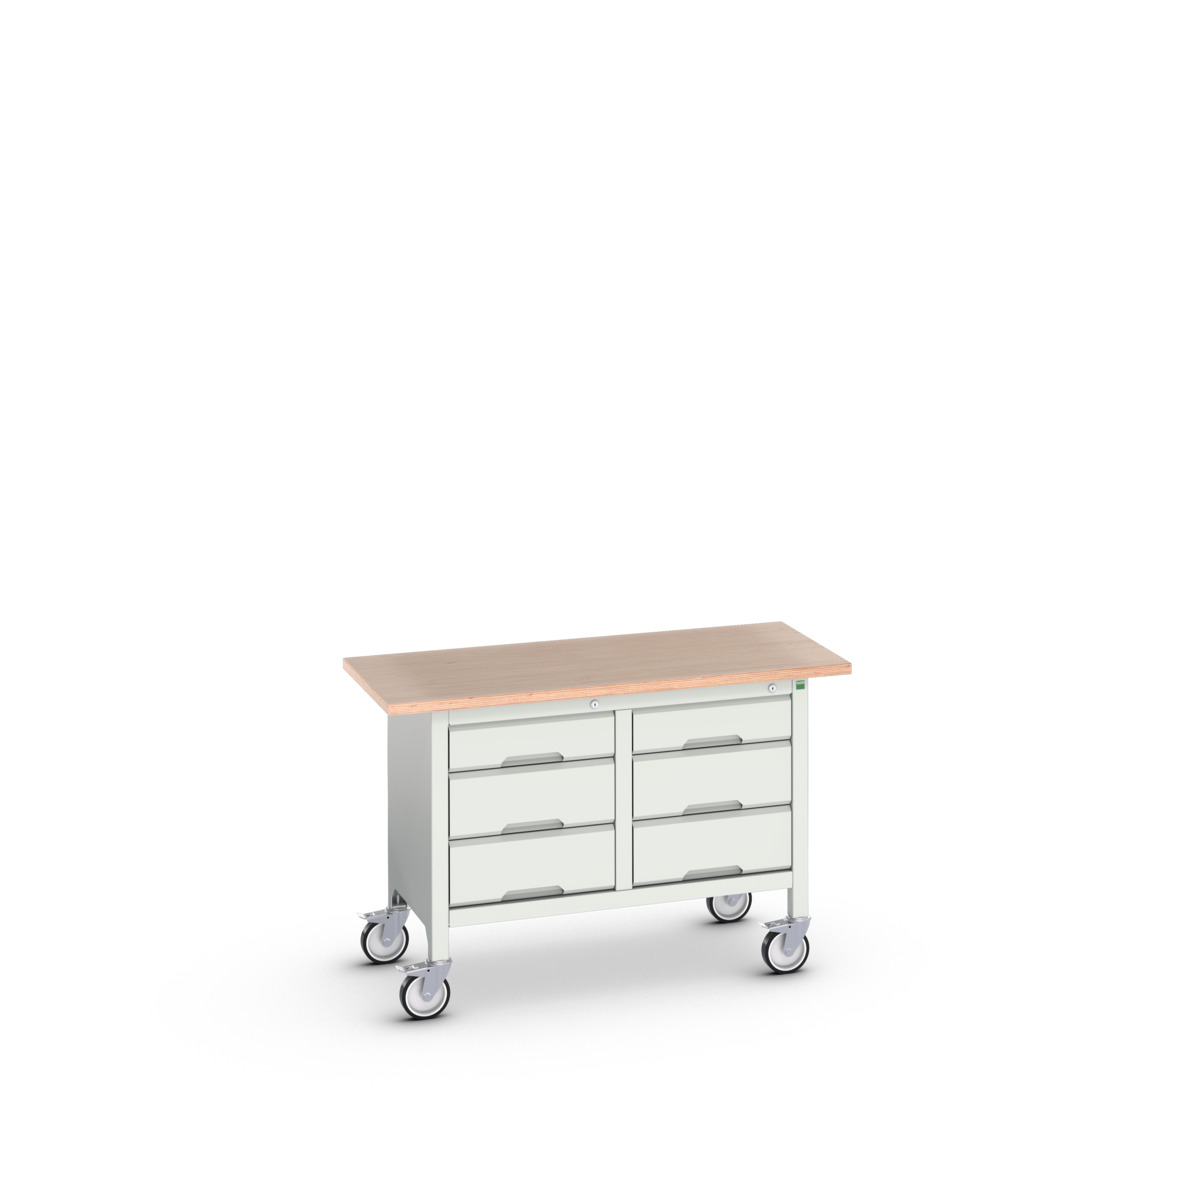 16923204.16 - verso mobile storage bench (mpx)